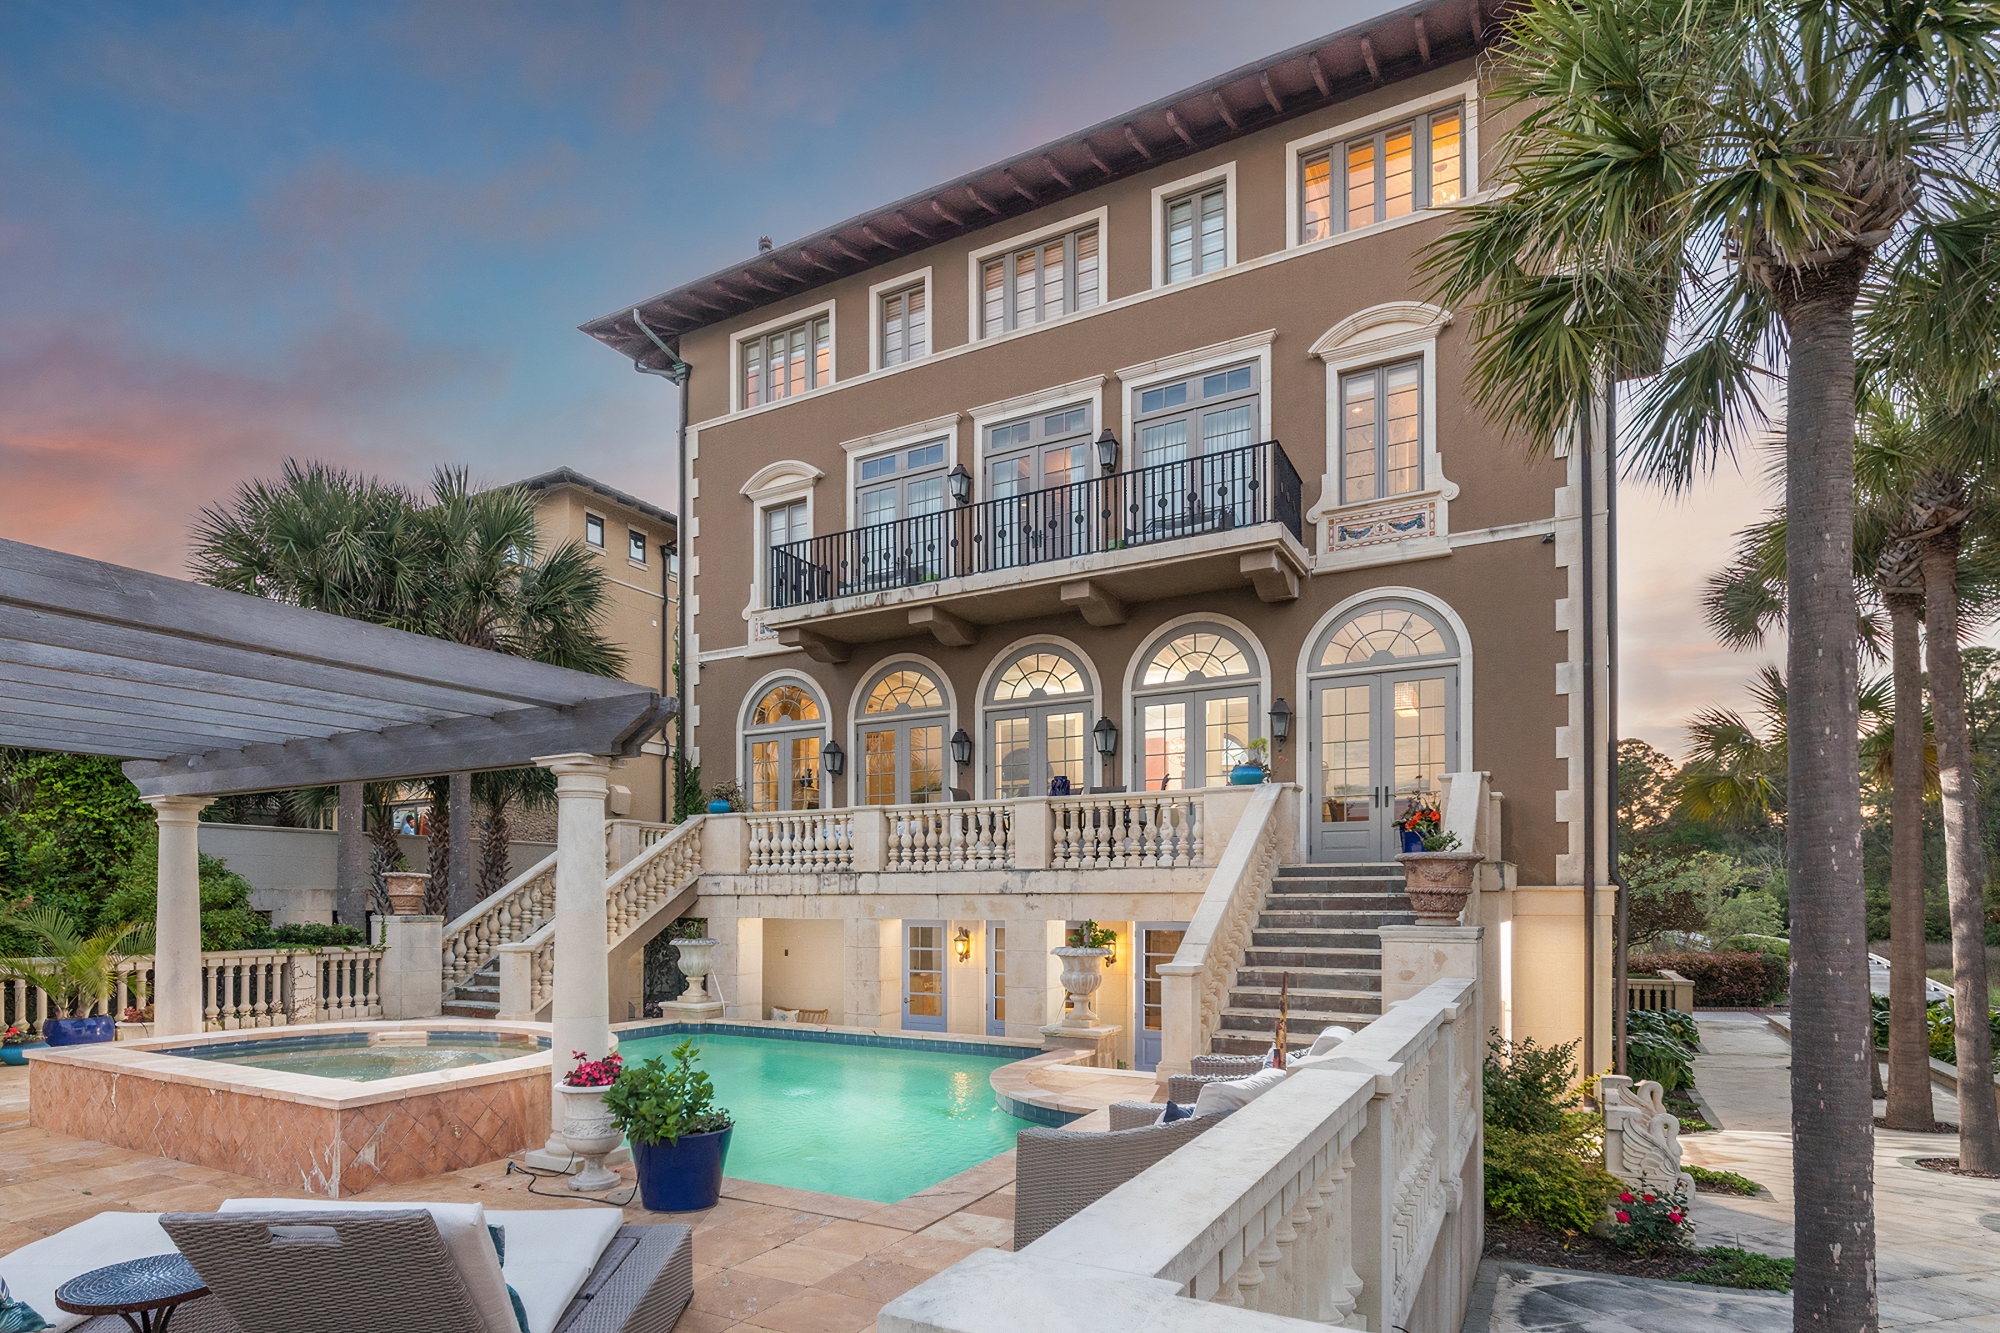 Hilton Head Island Oceanfront Home with a pool on the beach